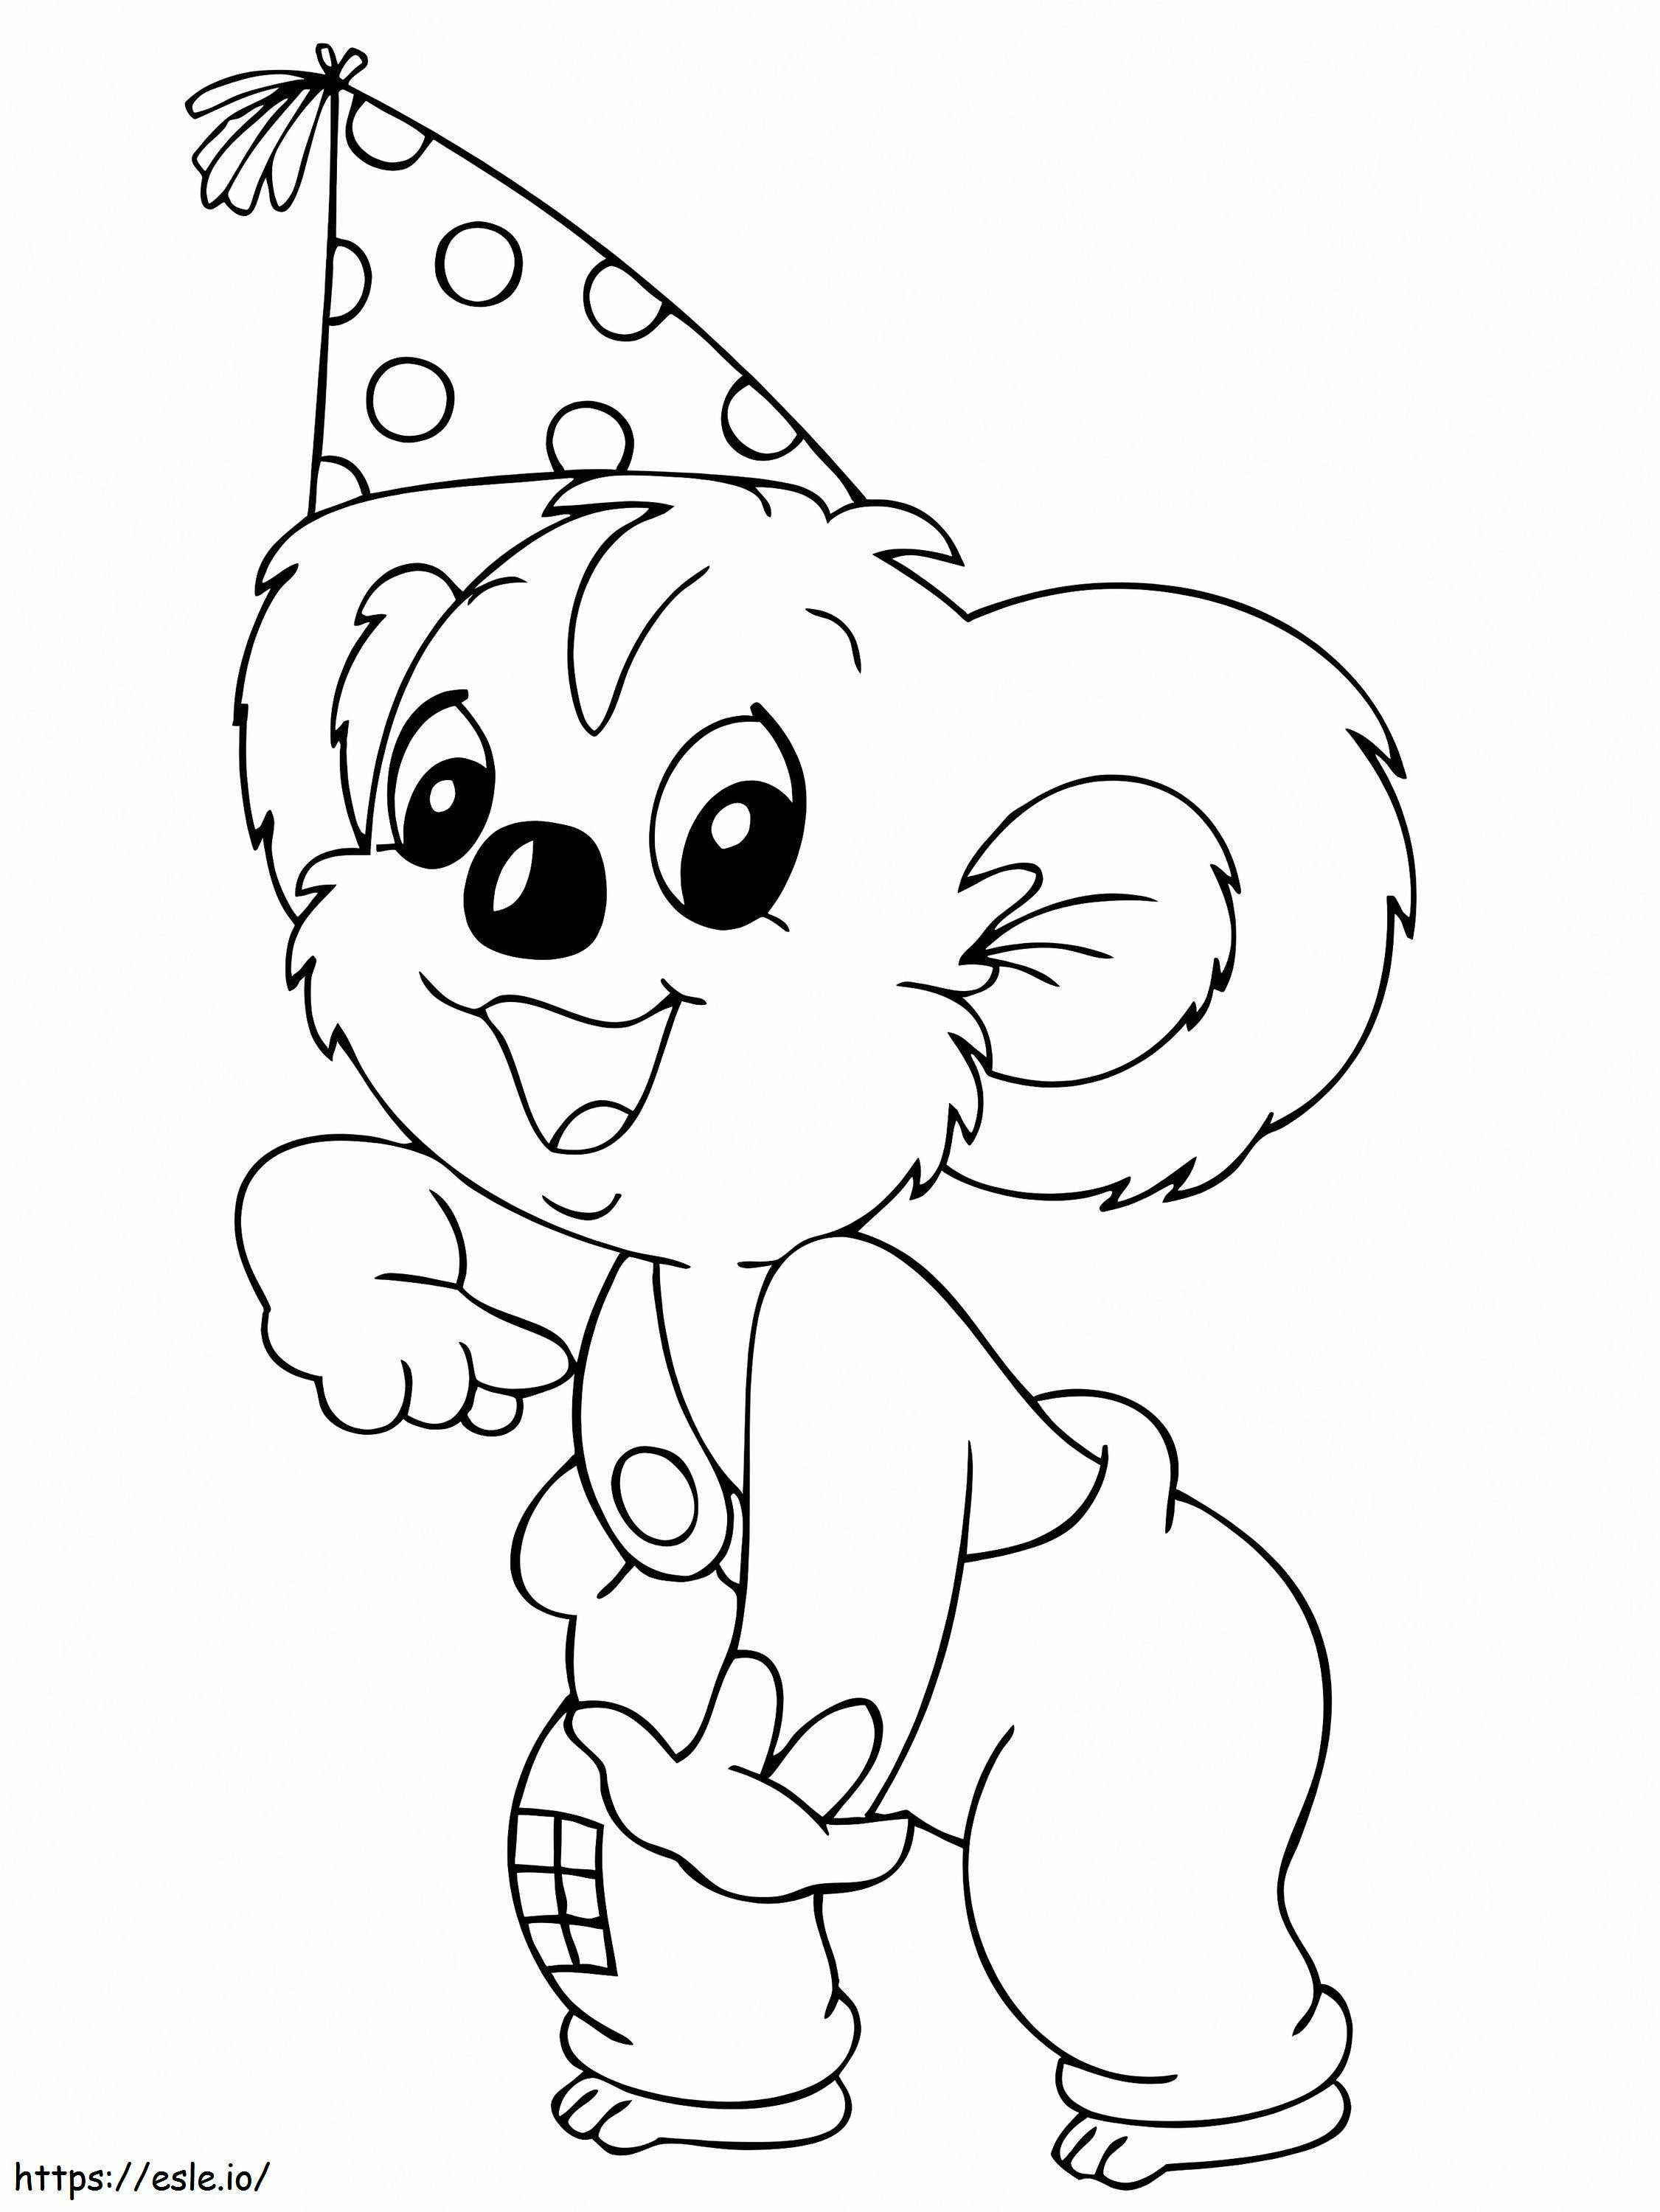 Happy Blinky Bill coloring page